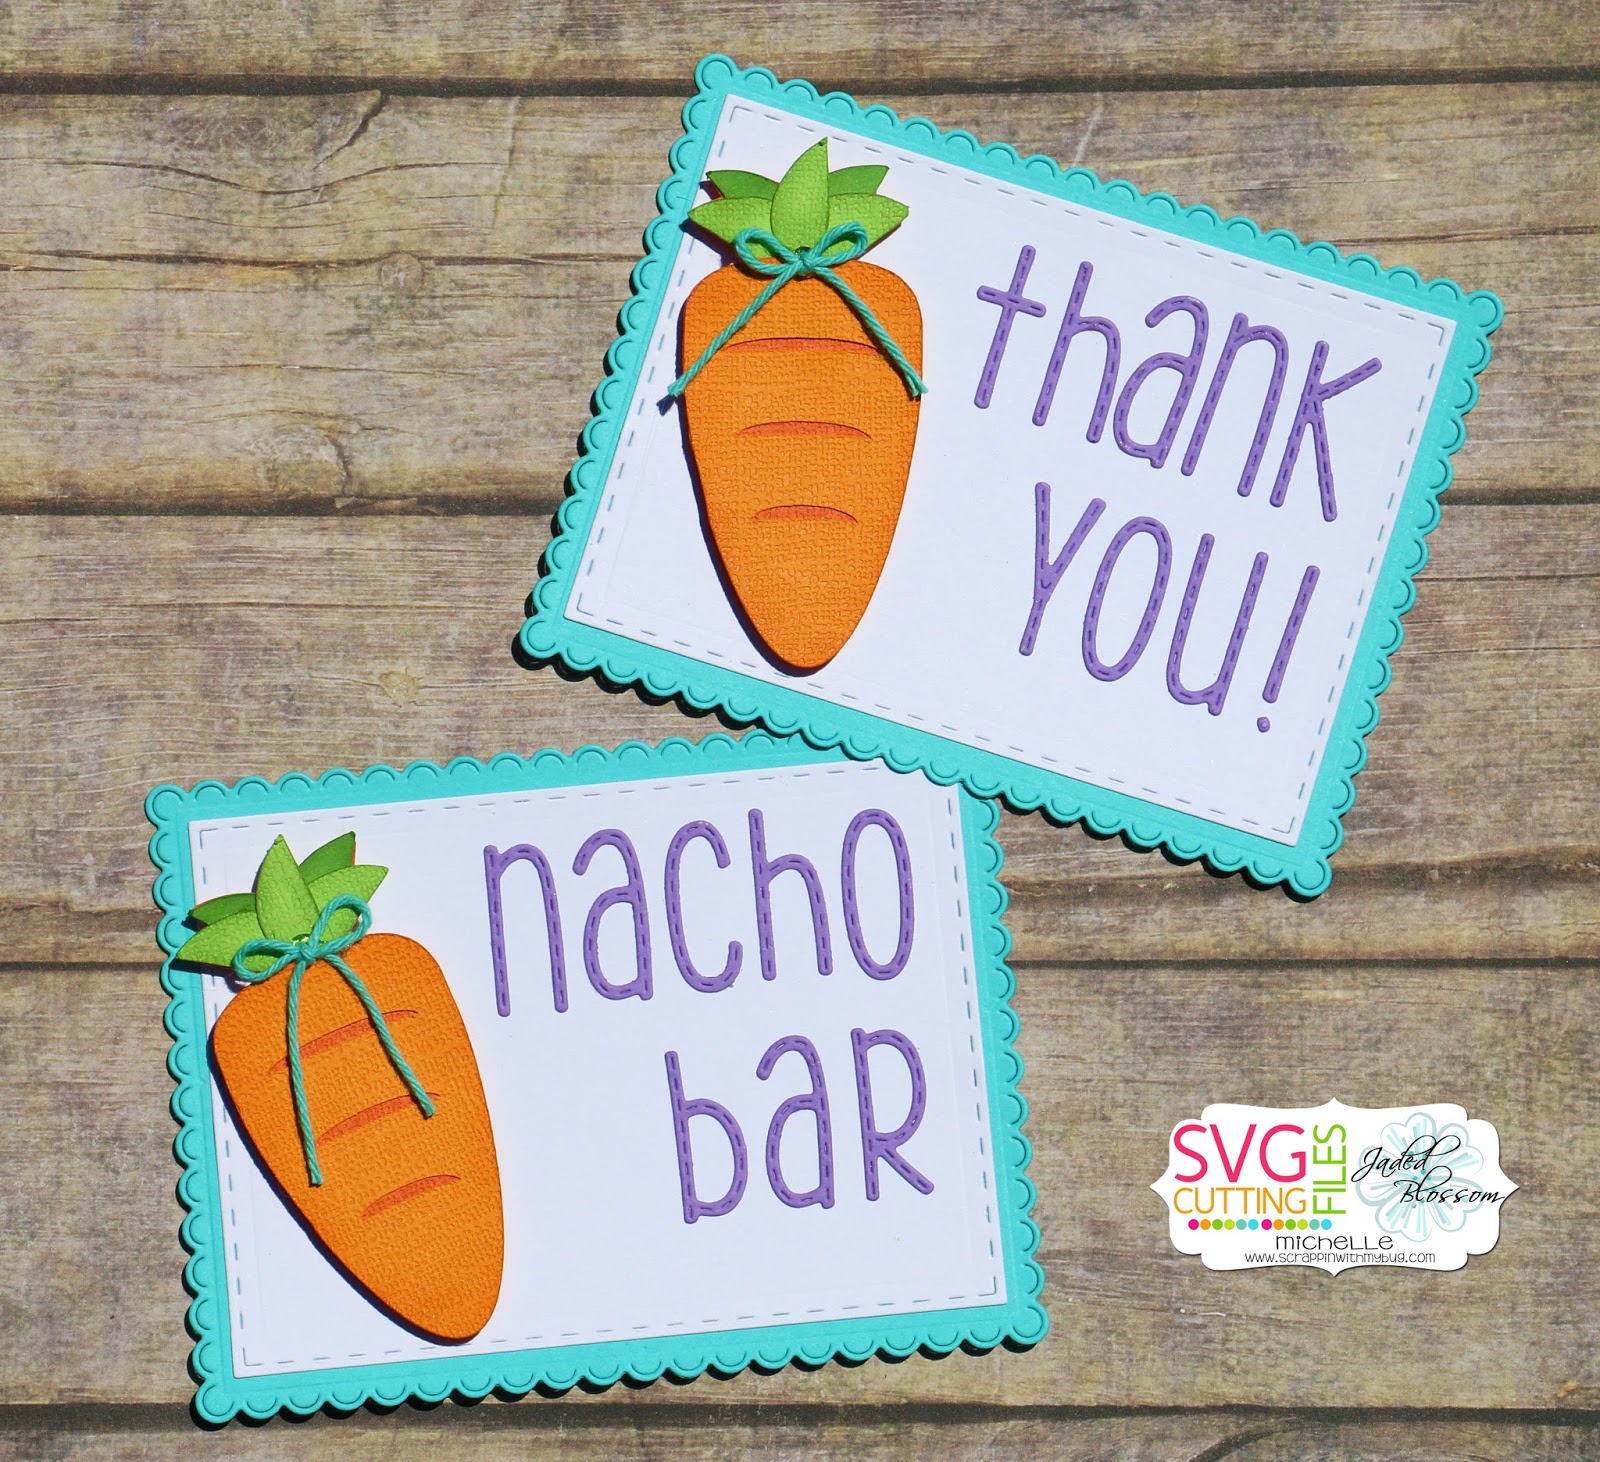 Download SVG Cutting Files: Carrot Place Cards